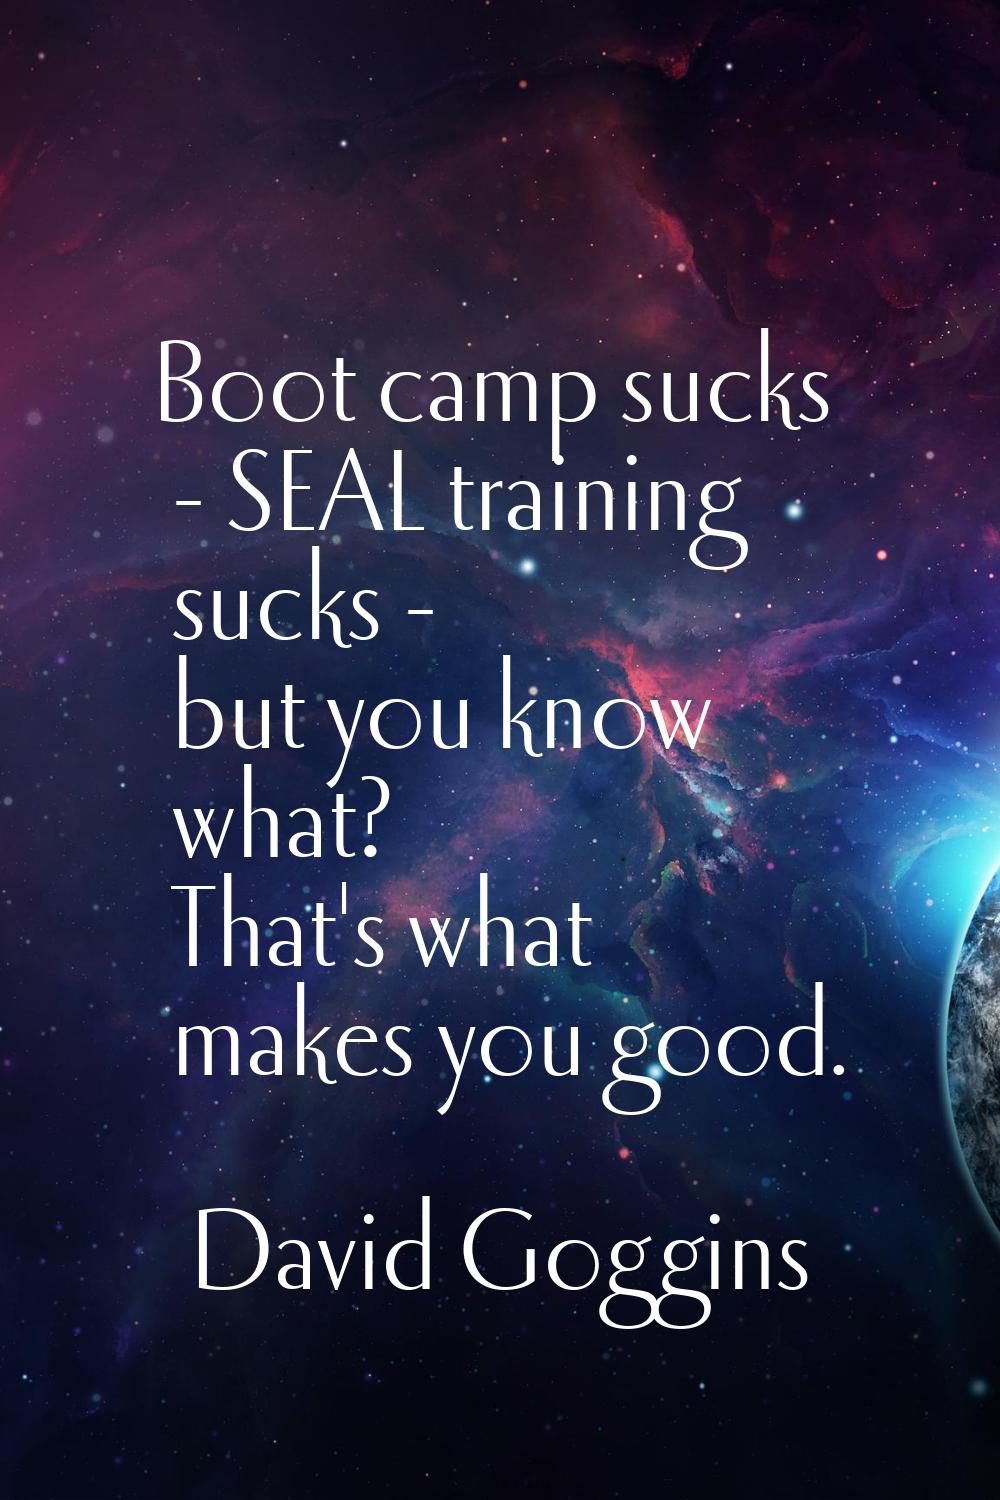 Boot camp sucks - SEAL training sucks - but you know what? That's what makes you good.